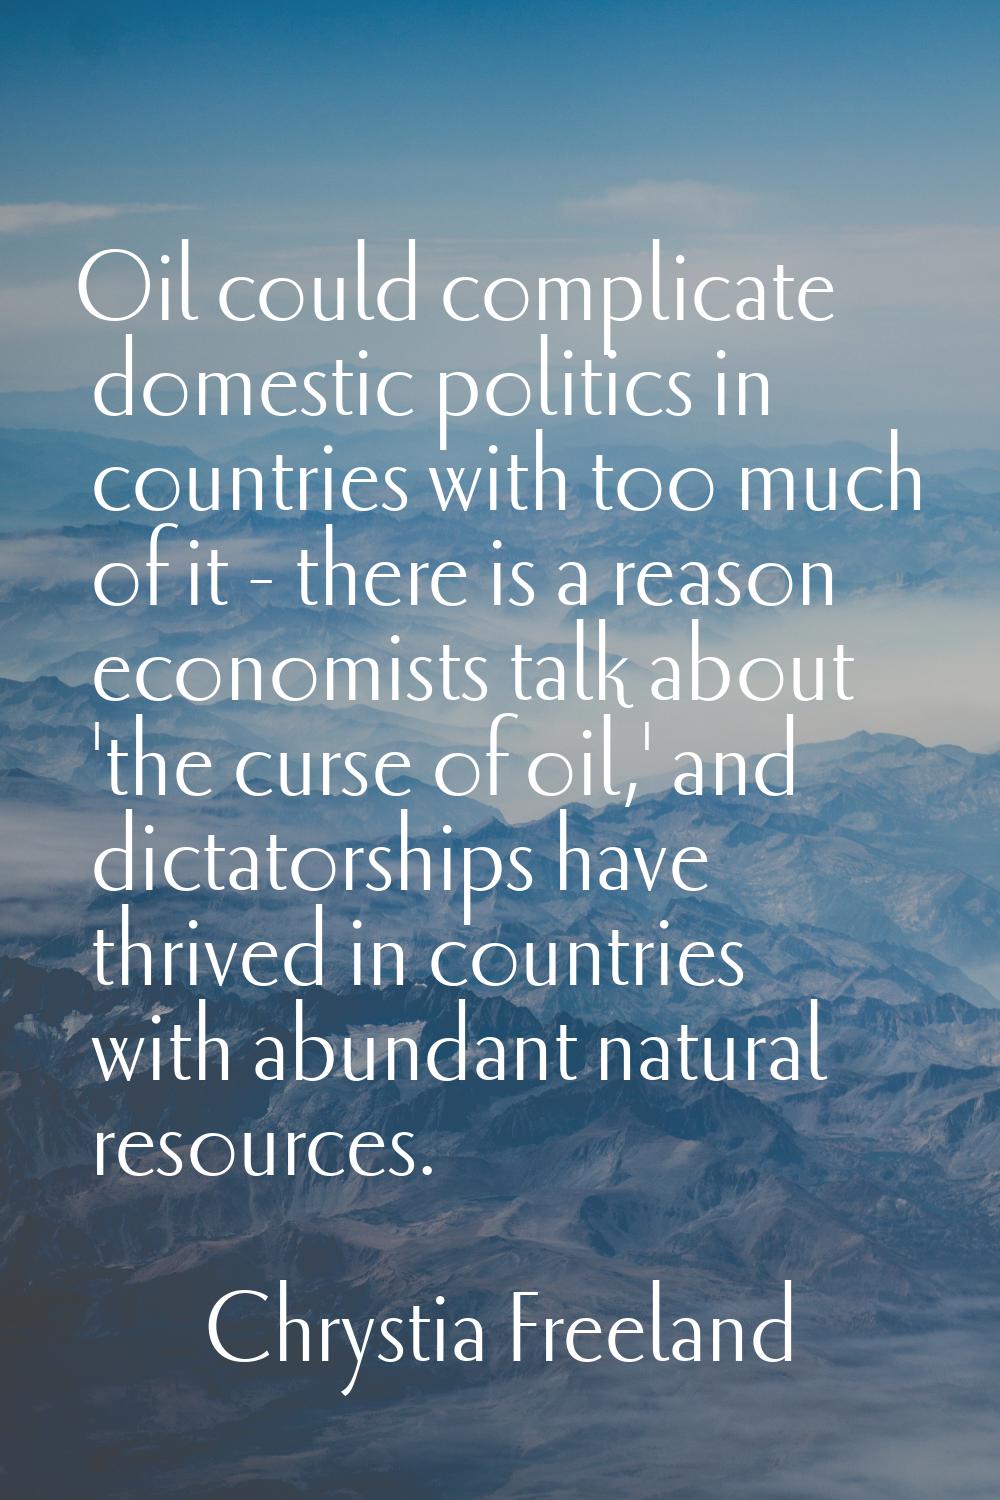 Oil could complicate domestic politics in countries with too much of it - there is a reason economi